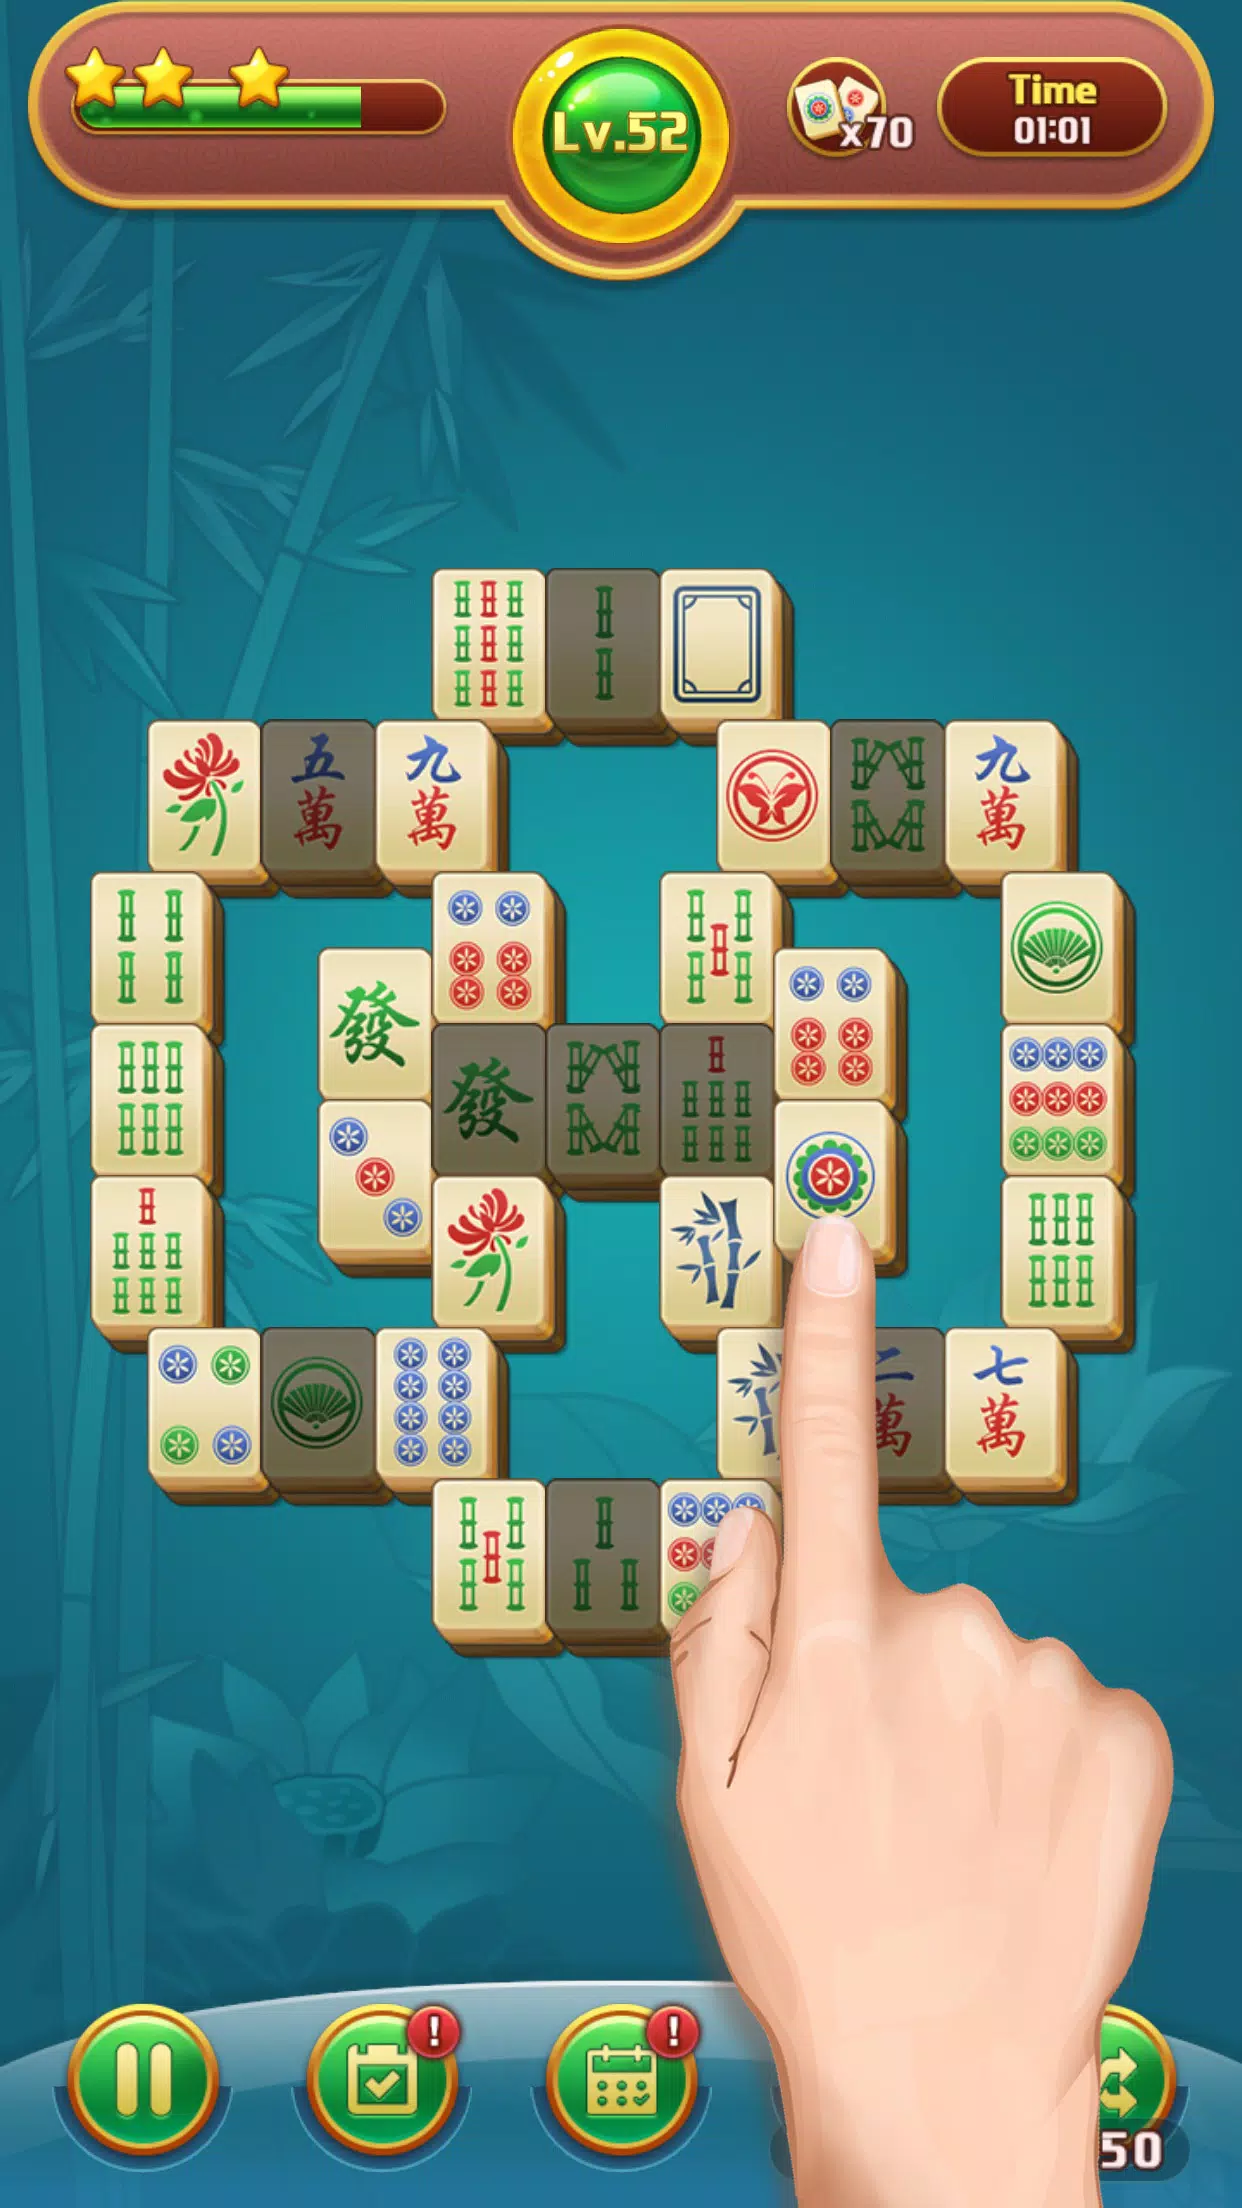 Mahjong connect - Apps on Google Play